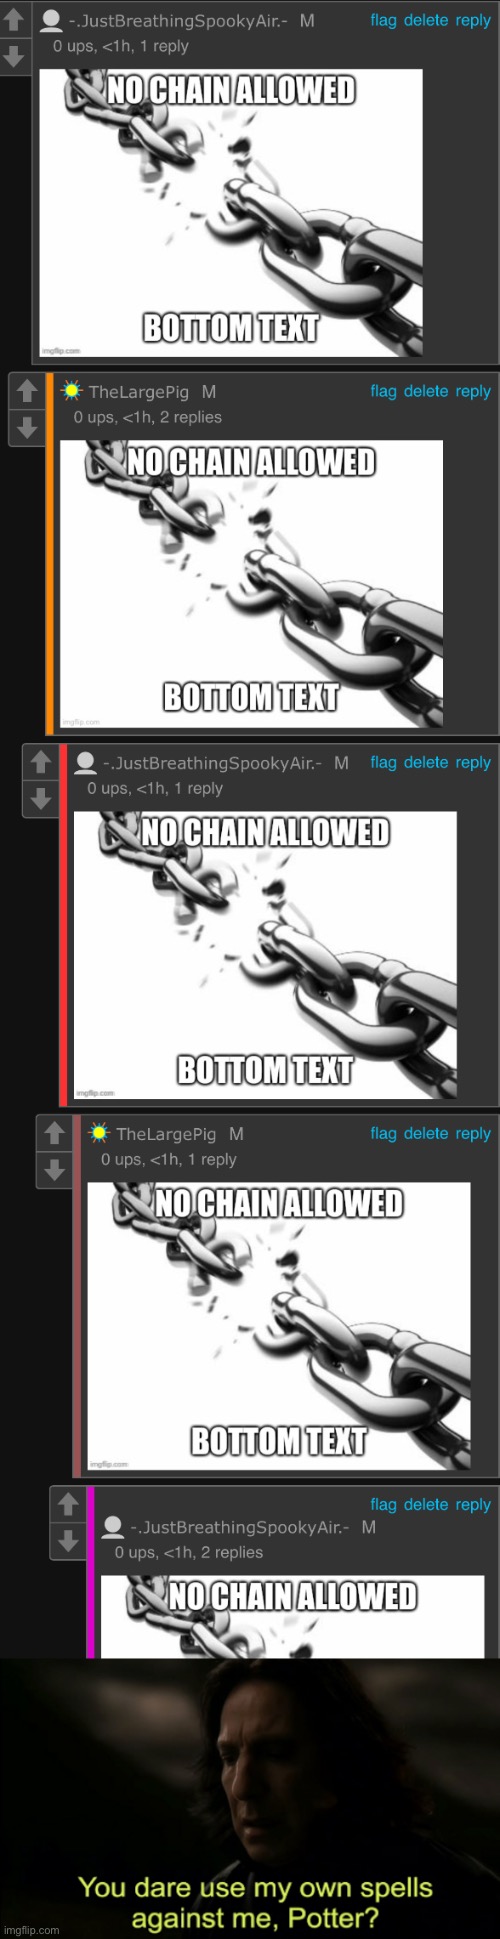 NO CHAINS | image tagged in you dare use my own spells against me | made w/ Imgflip meme maker